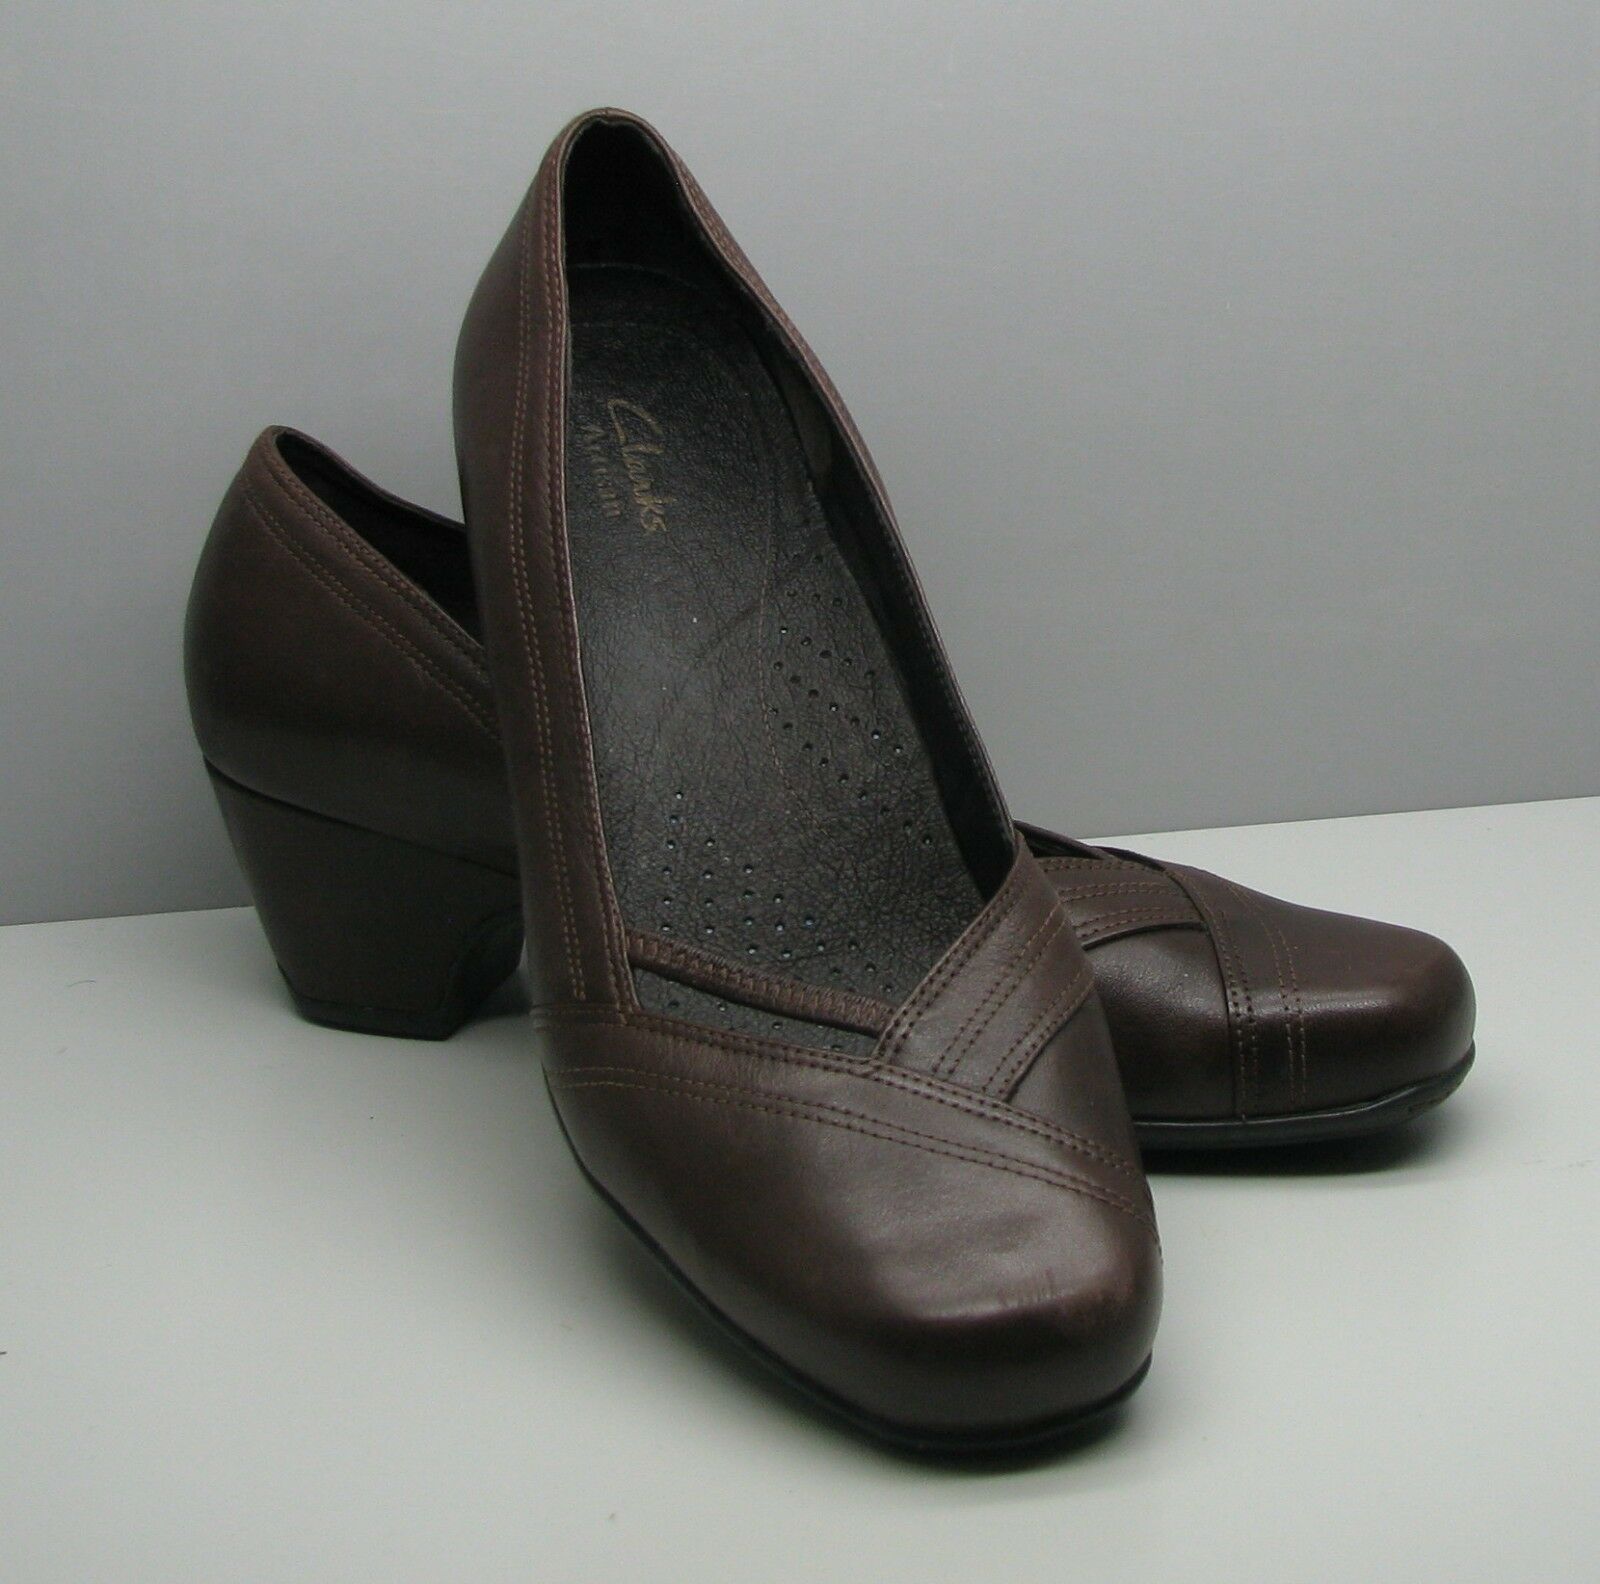 Clarks Shoes: listings